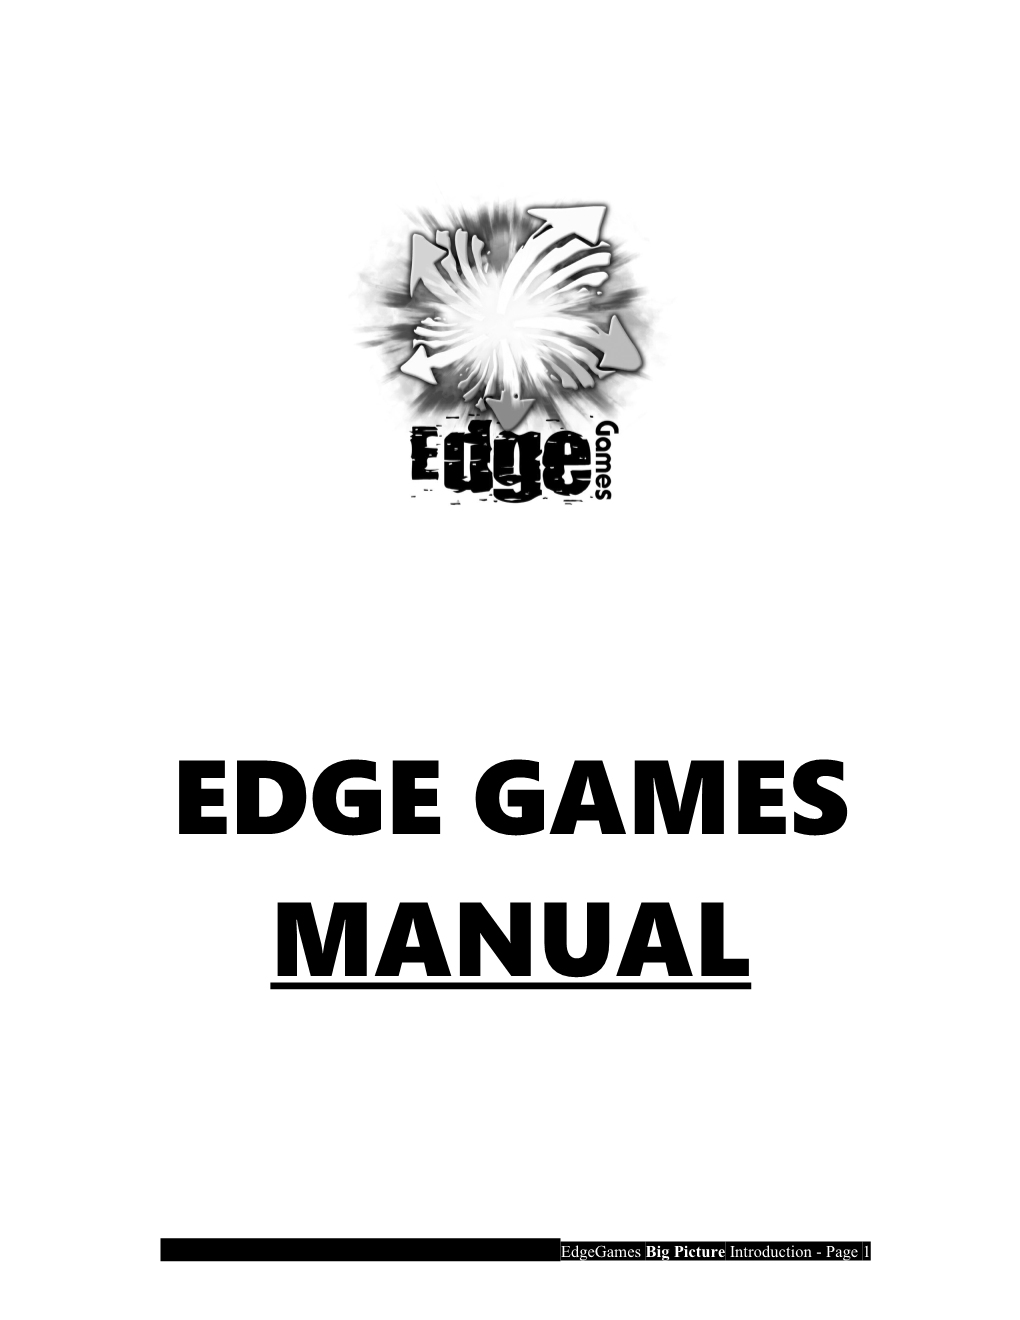 The Edgegames Manual S Brief Layout